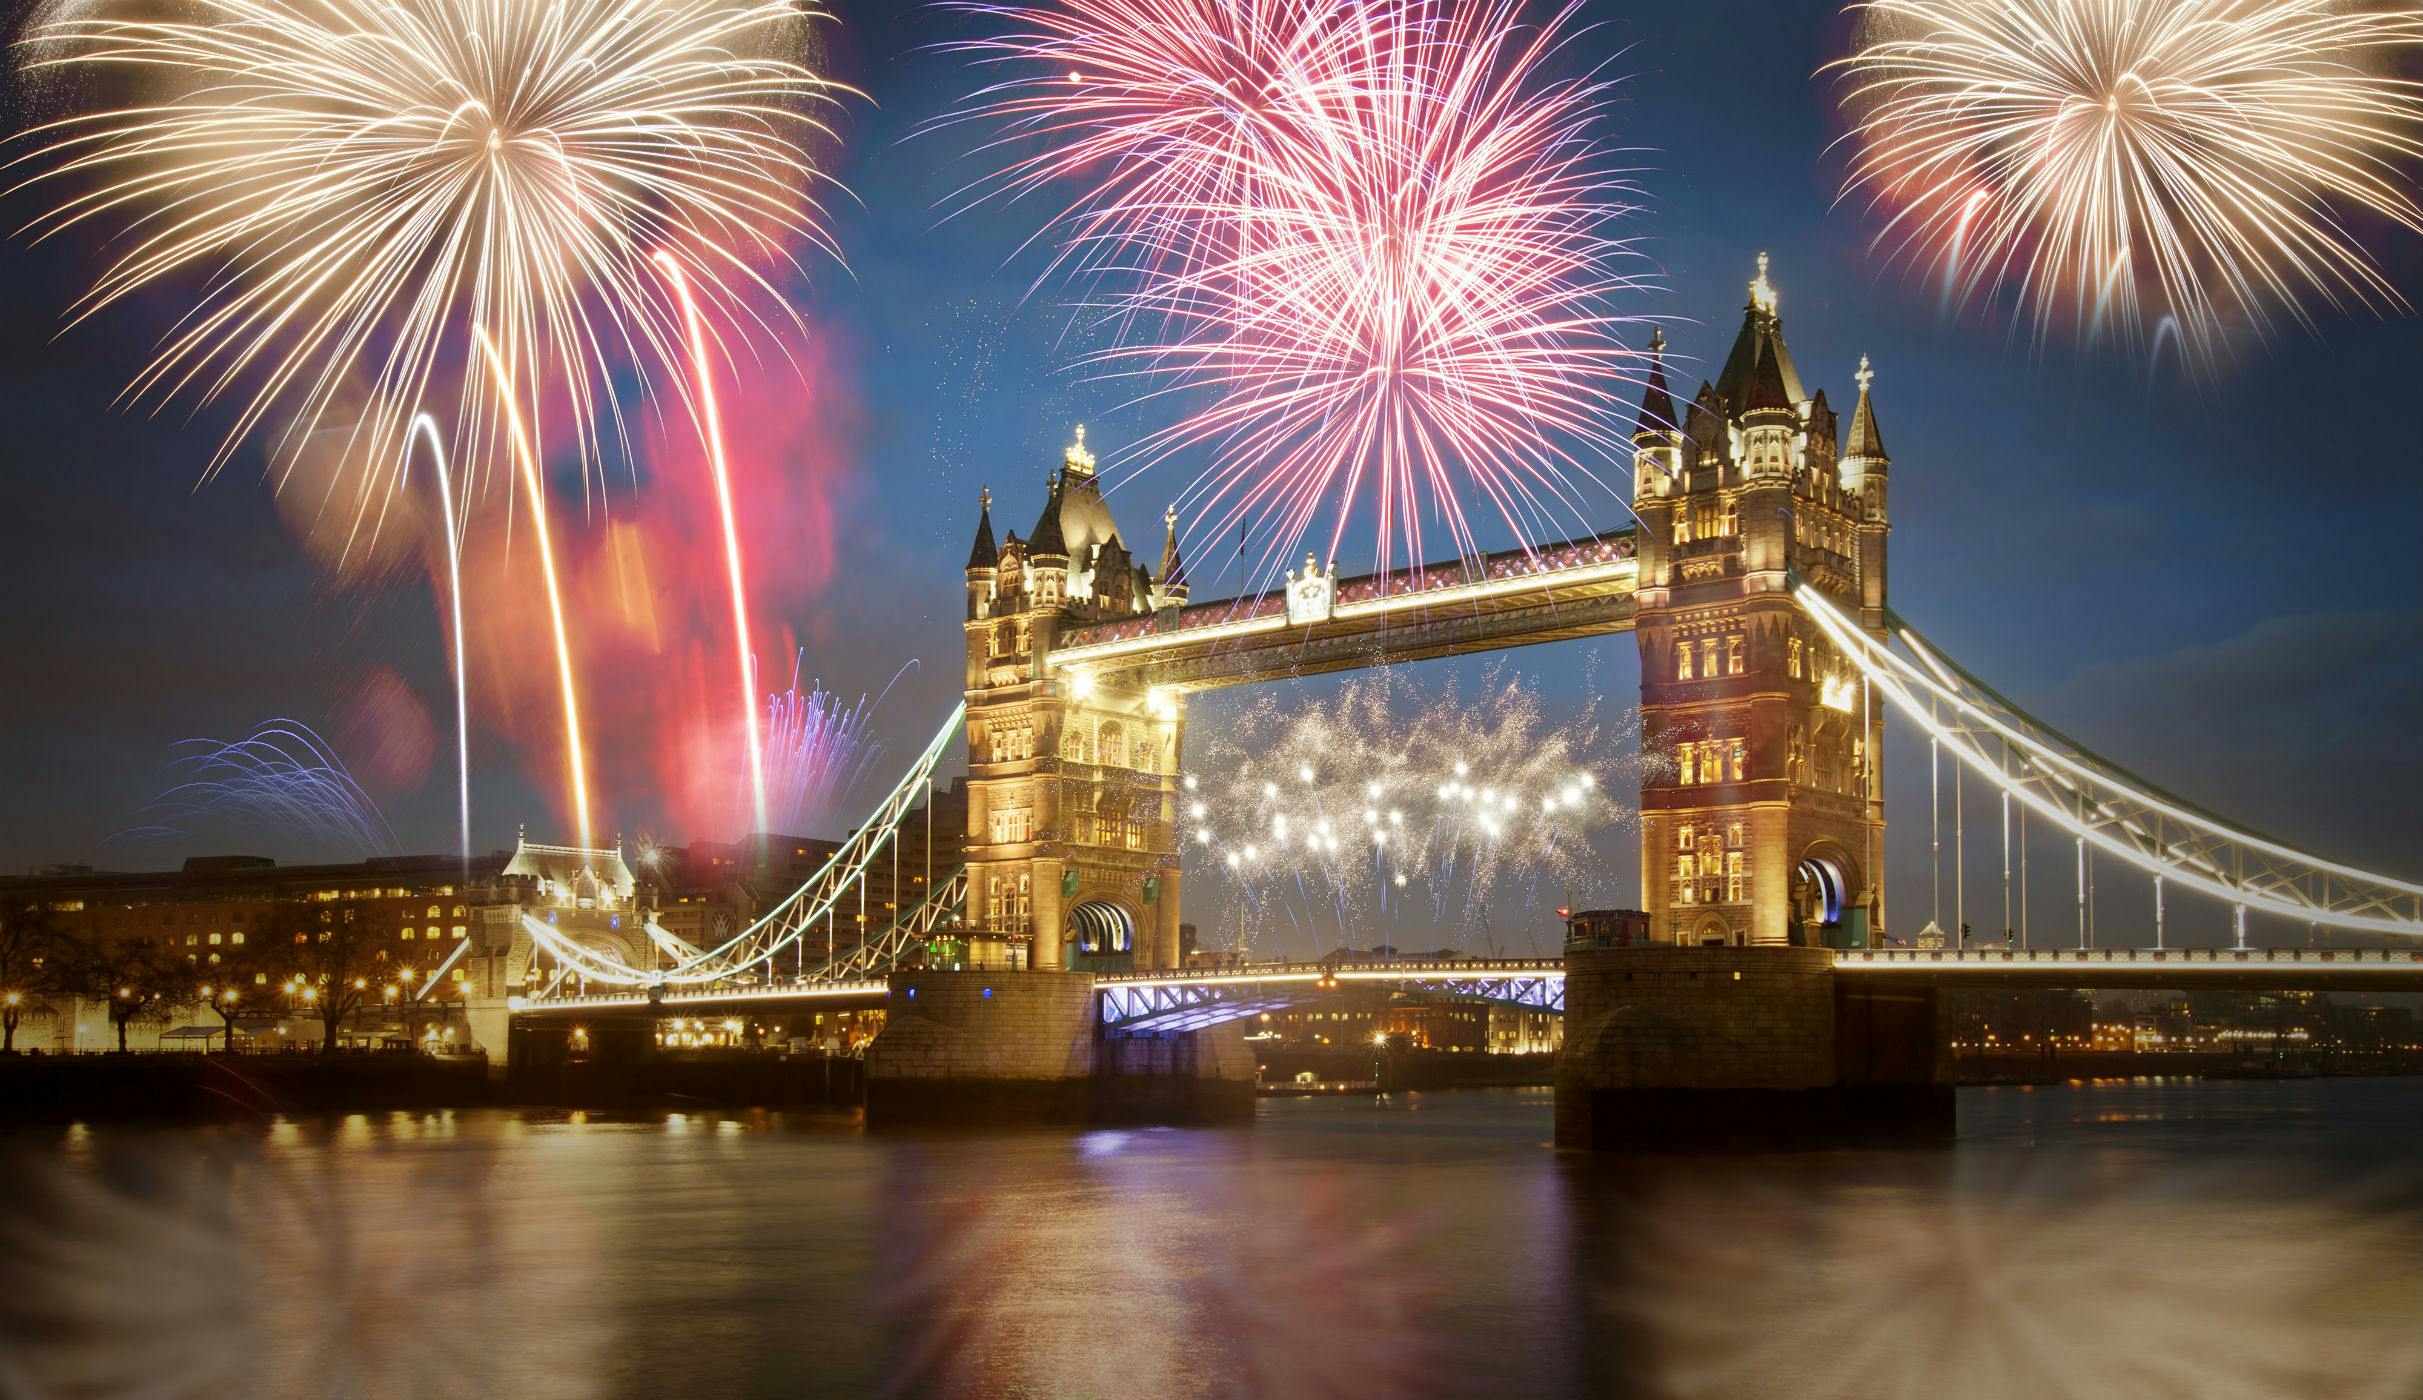 New Year’s in London